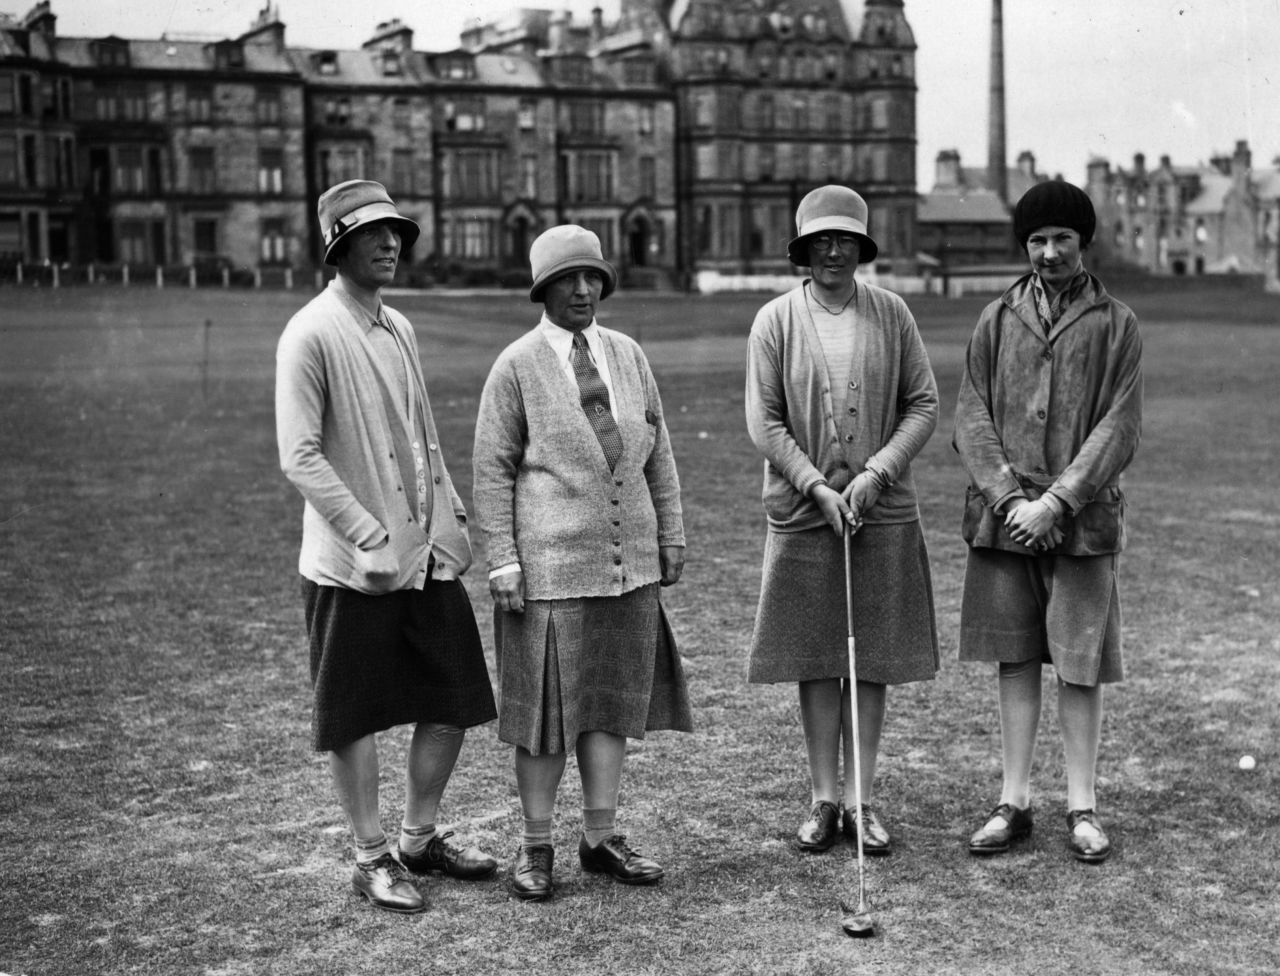 Four first-round competitors in a Ladies' Scottish Foursomes tournament on the Royal and Ancient Course in June 1928.<br /><br />Women golfers would sometimes wear what was called a "Miss Higgins Hoop."<br /><br />"It was really just a piece of elastic that was moved up to around their knees and designed to keep your skirt from blowing up in the wind -- women had to remain modest. Often what would happen is that they would weight their skirts with wire along the bottom edge rather than having the Miss Higgins Hoop," Fleming says. <br /><br />"During the 1920s and 1930s women's fashion in general changed -- there was less corsetry -- so golf fashion kind of reflects wider fashions."